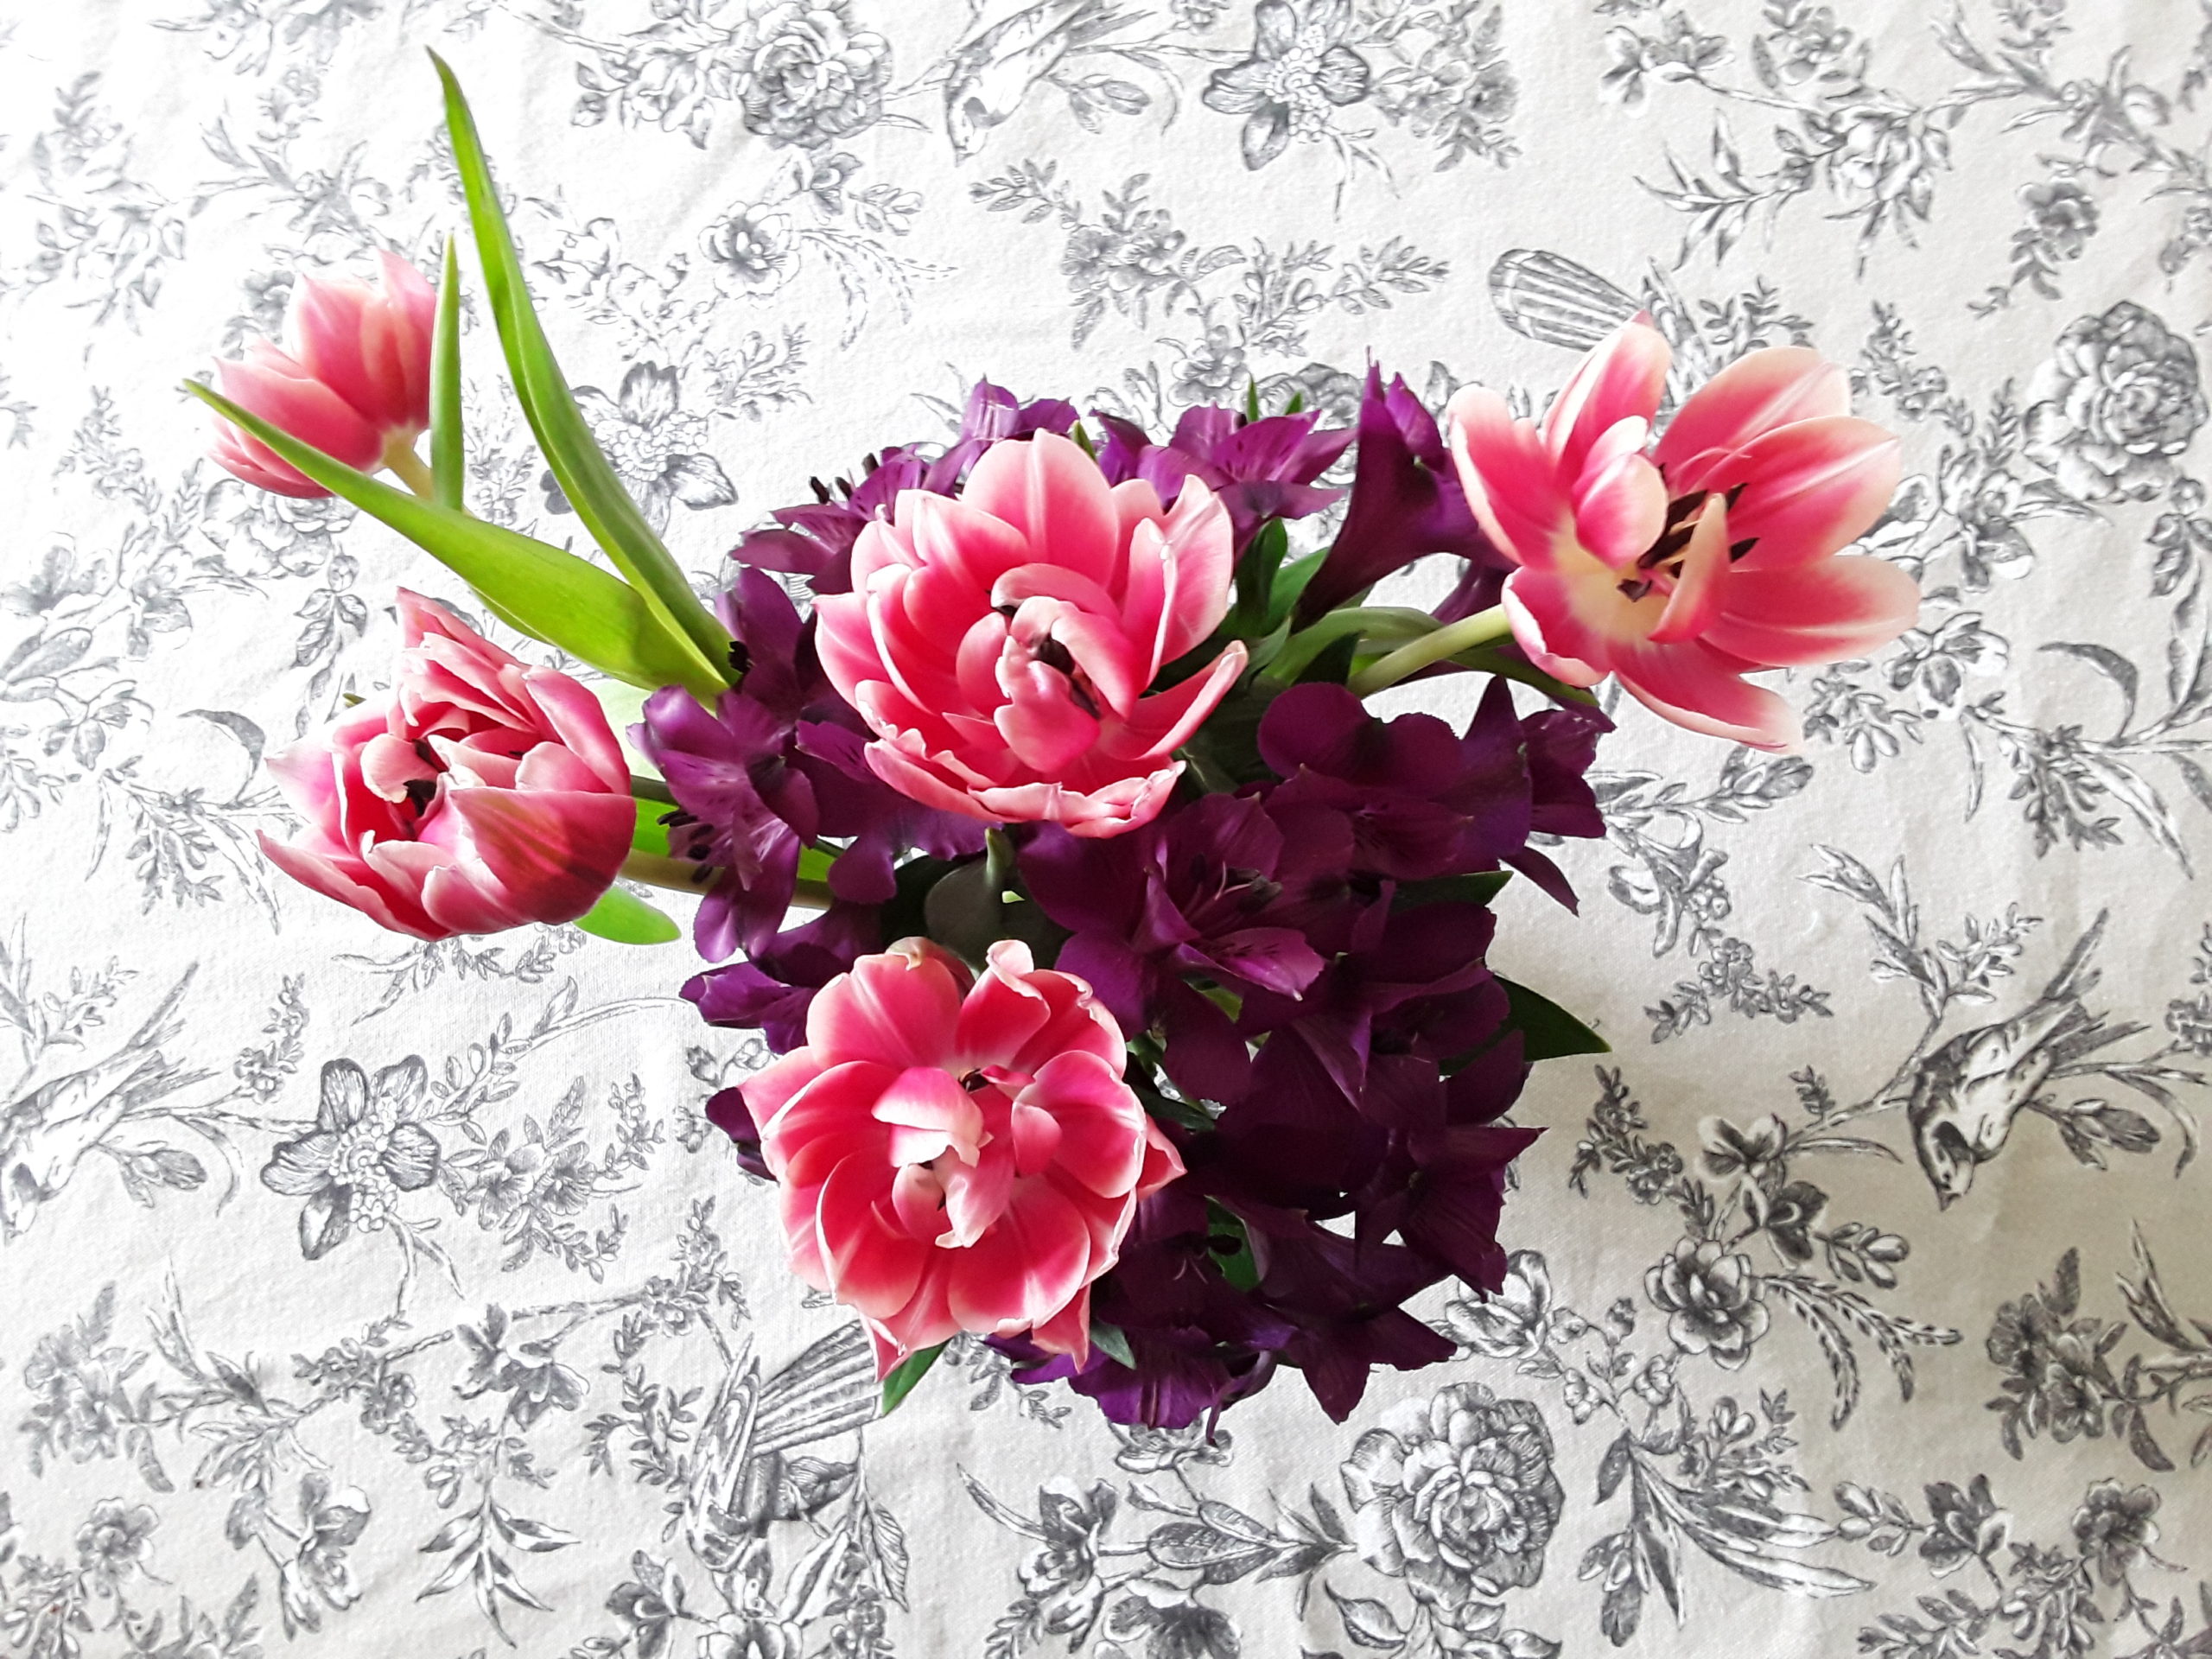 Non-traditional Flower image for a non-traditional Mother's Day post: Pink Tulips in a vase against a backdrop of a grey tablecloth with a black bird pattern as viewed from above